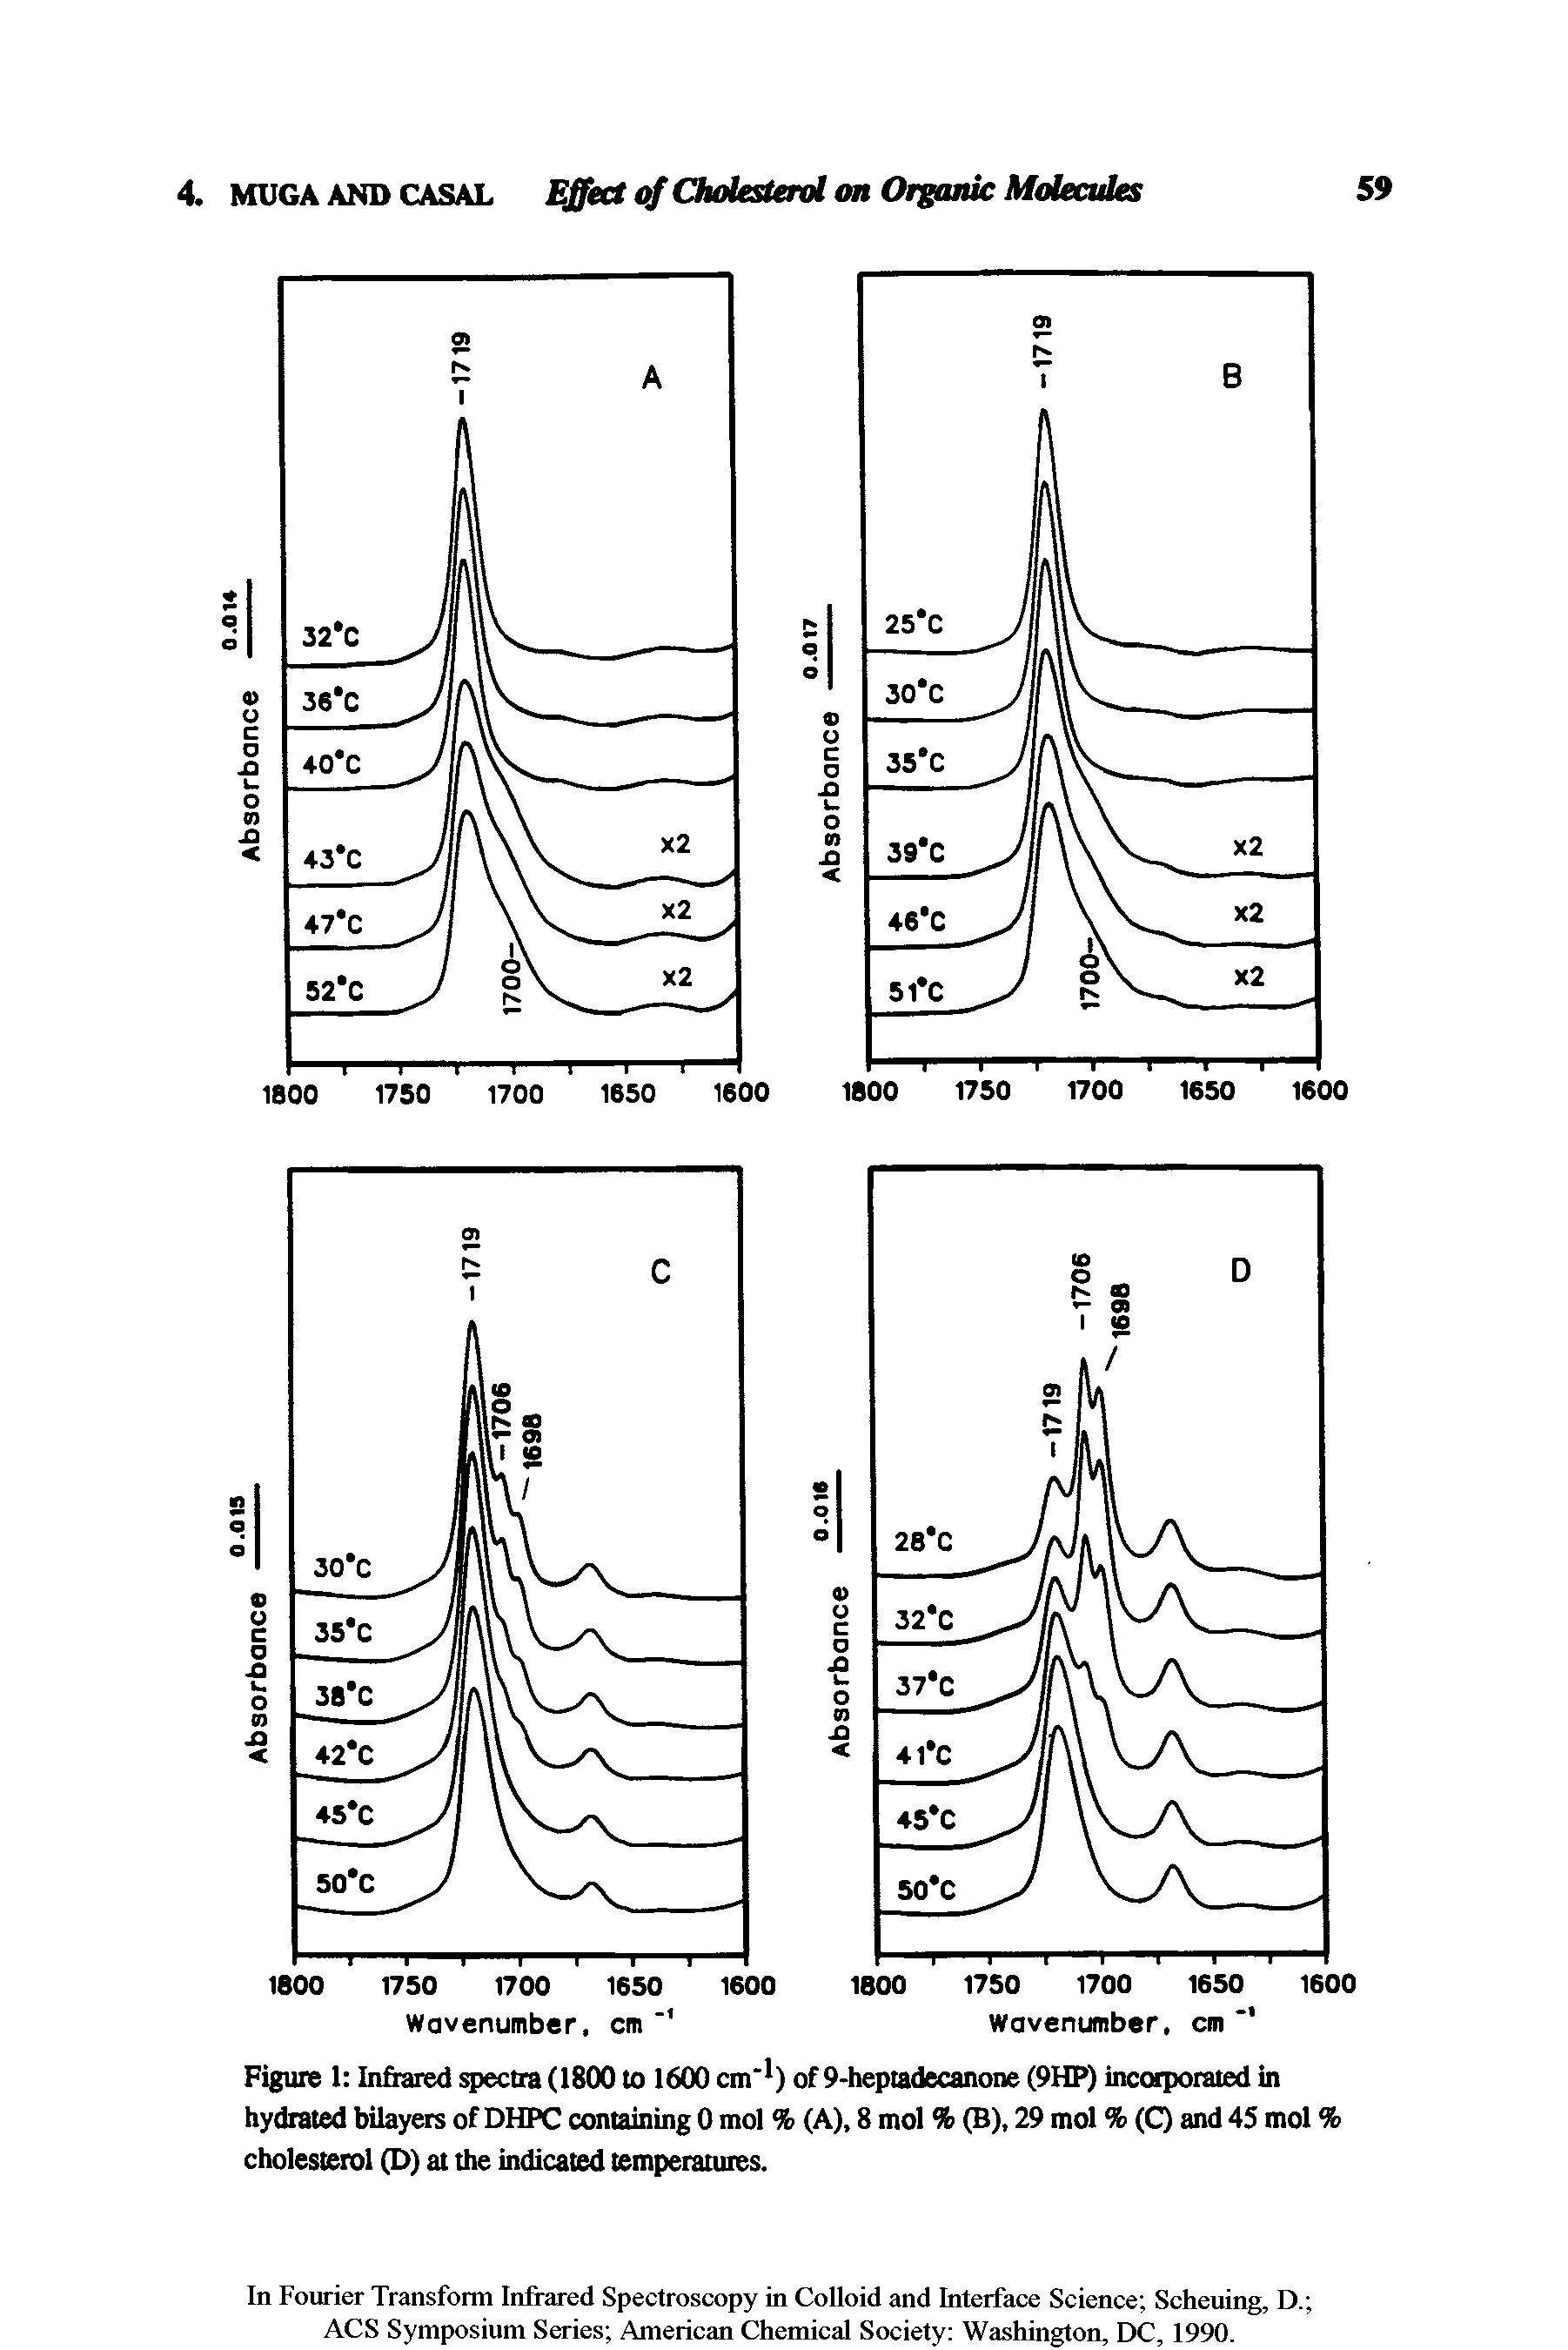 Figure 1 Infi aFed spectra (1800 to 16(X) cm ) of 9-heptadecanone (9HP) incorporated in hydrated bilayers of DHPC containing 0 mol % (A), 8 mol % (B), 29 mol % (C) and 45 mol % cholesterol (D) at the indicated temperatures.